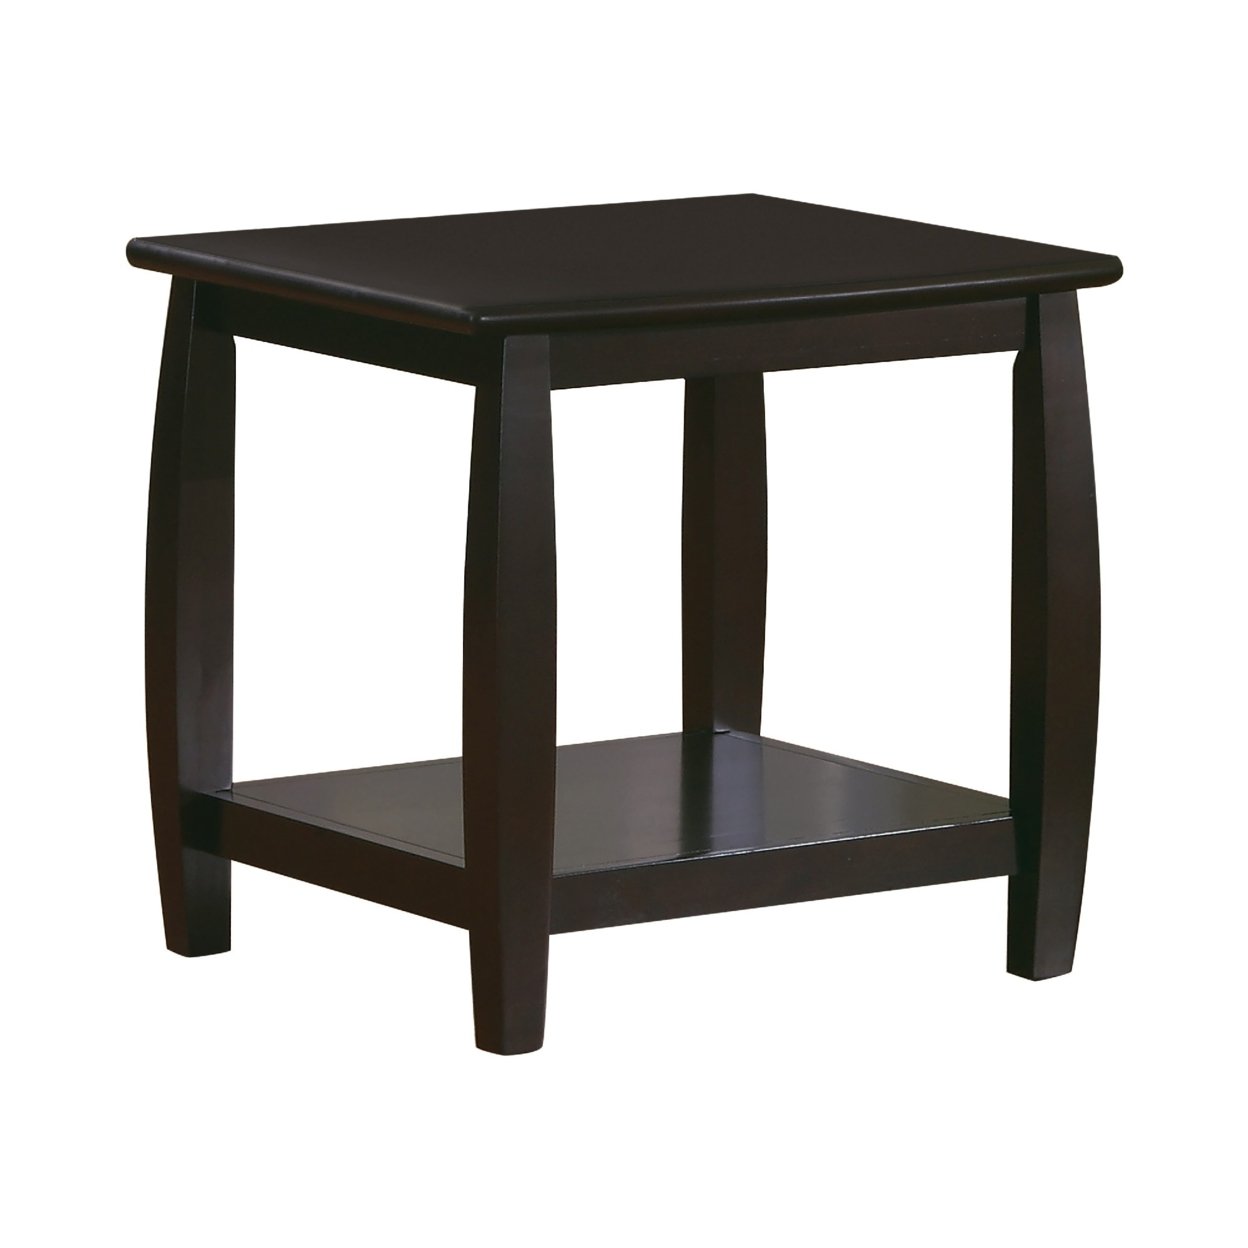 Saltoro Sherpi Contemporary Style Solid Wood End Table With Slightly Rounded Shape, Dark Brown- Saltoro Sherpi